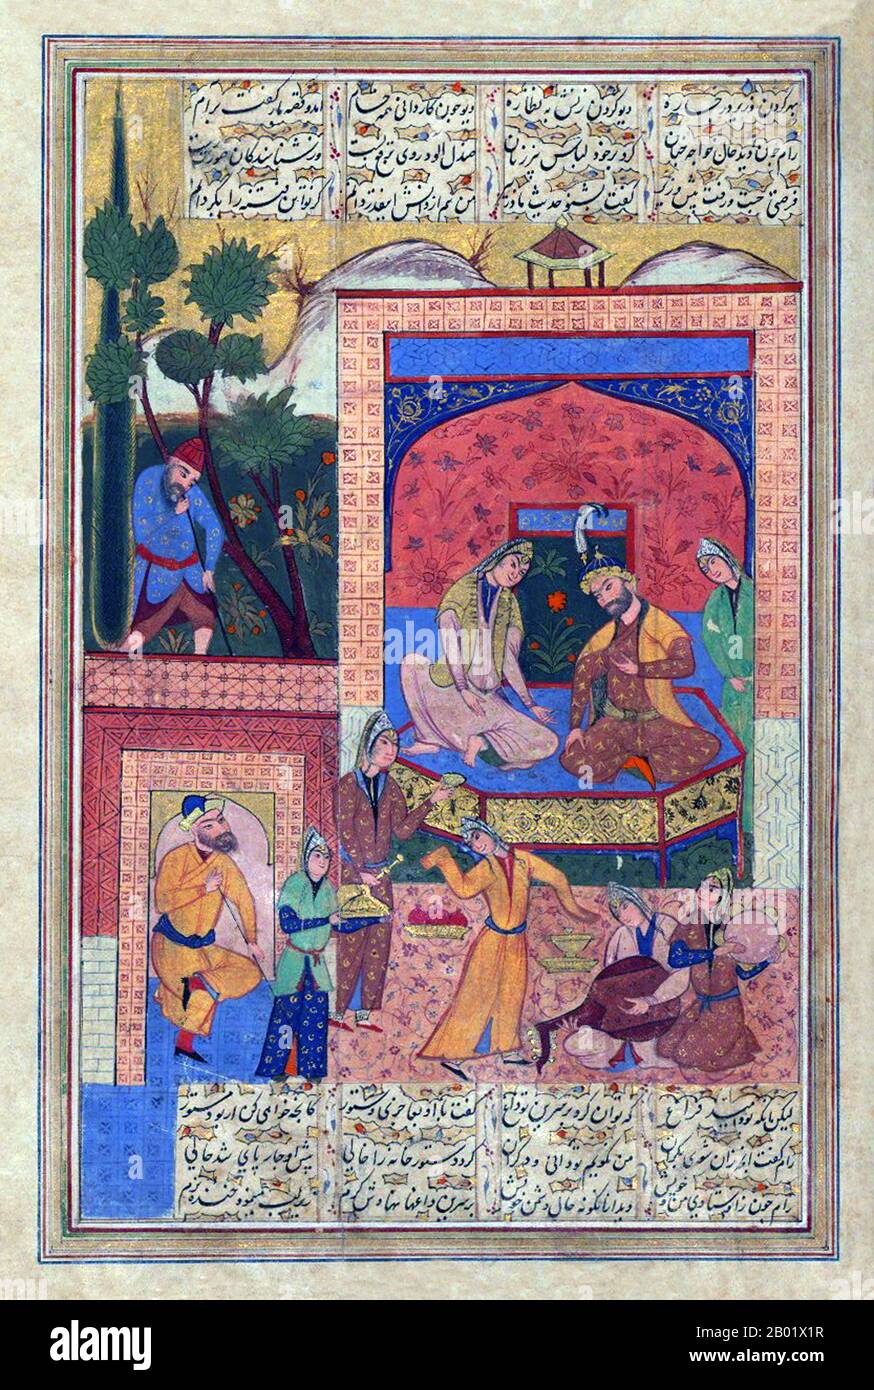 Iran/Persia: Bahram Gur in the Sandalwood Pavilion. From a manuscript of Amir Khusraw's Hasht-Bihisht, Safavid Dynasty, 1609.  Bahram V (406-438) was the fourteenth Sassanid King of Persia (r. 421-438). Also called Bahram Gur or Bahramgur, he was a son of Yazdegerd I (r. 399-421), after whose sudden death (or assassination) he gained the crown against the opposition of the grandees by the help of Mundhir, the Arab dynast of al-Hirah. Stock Photo